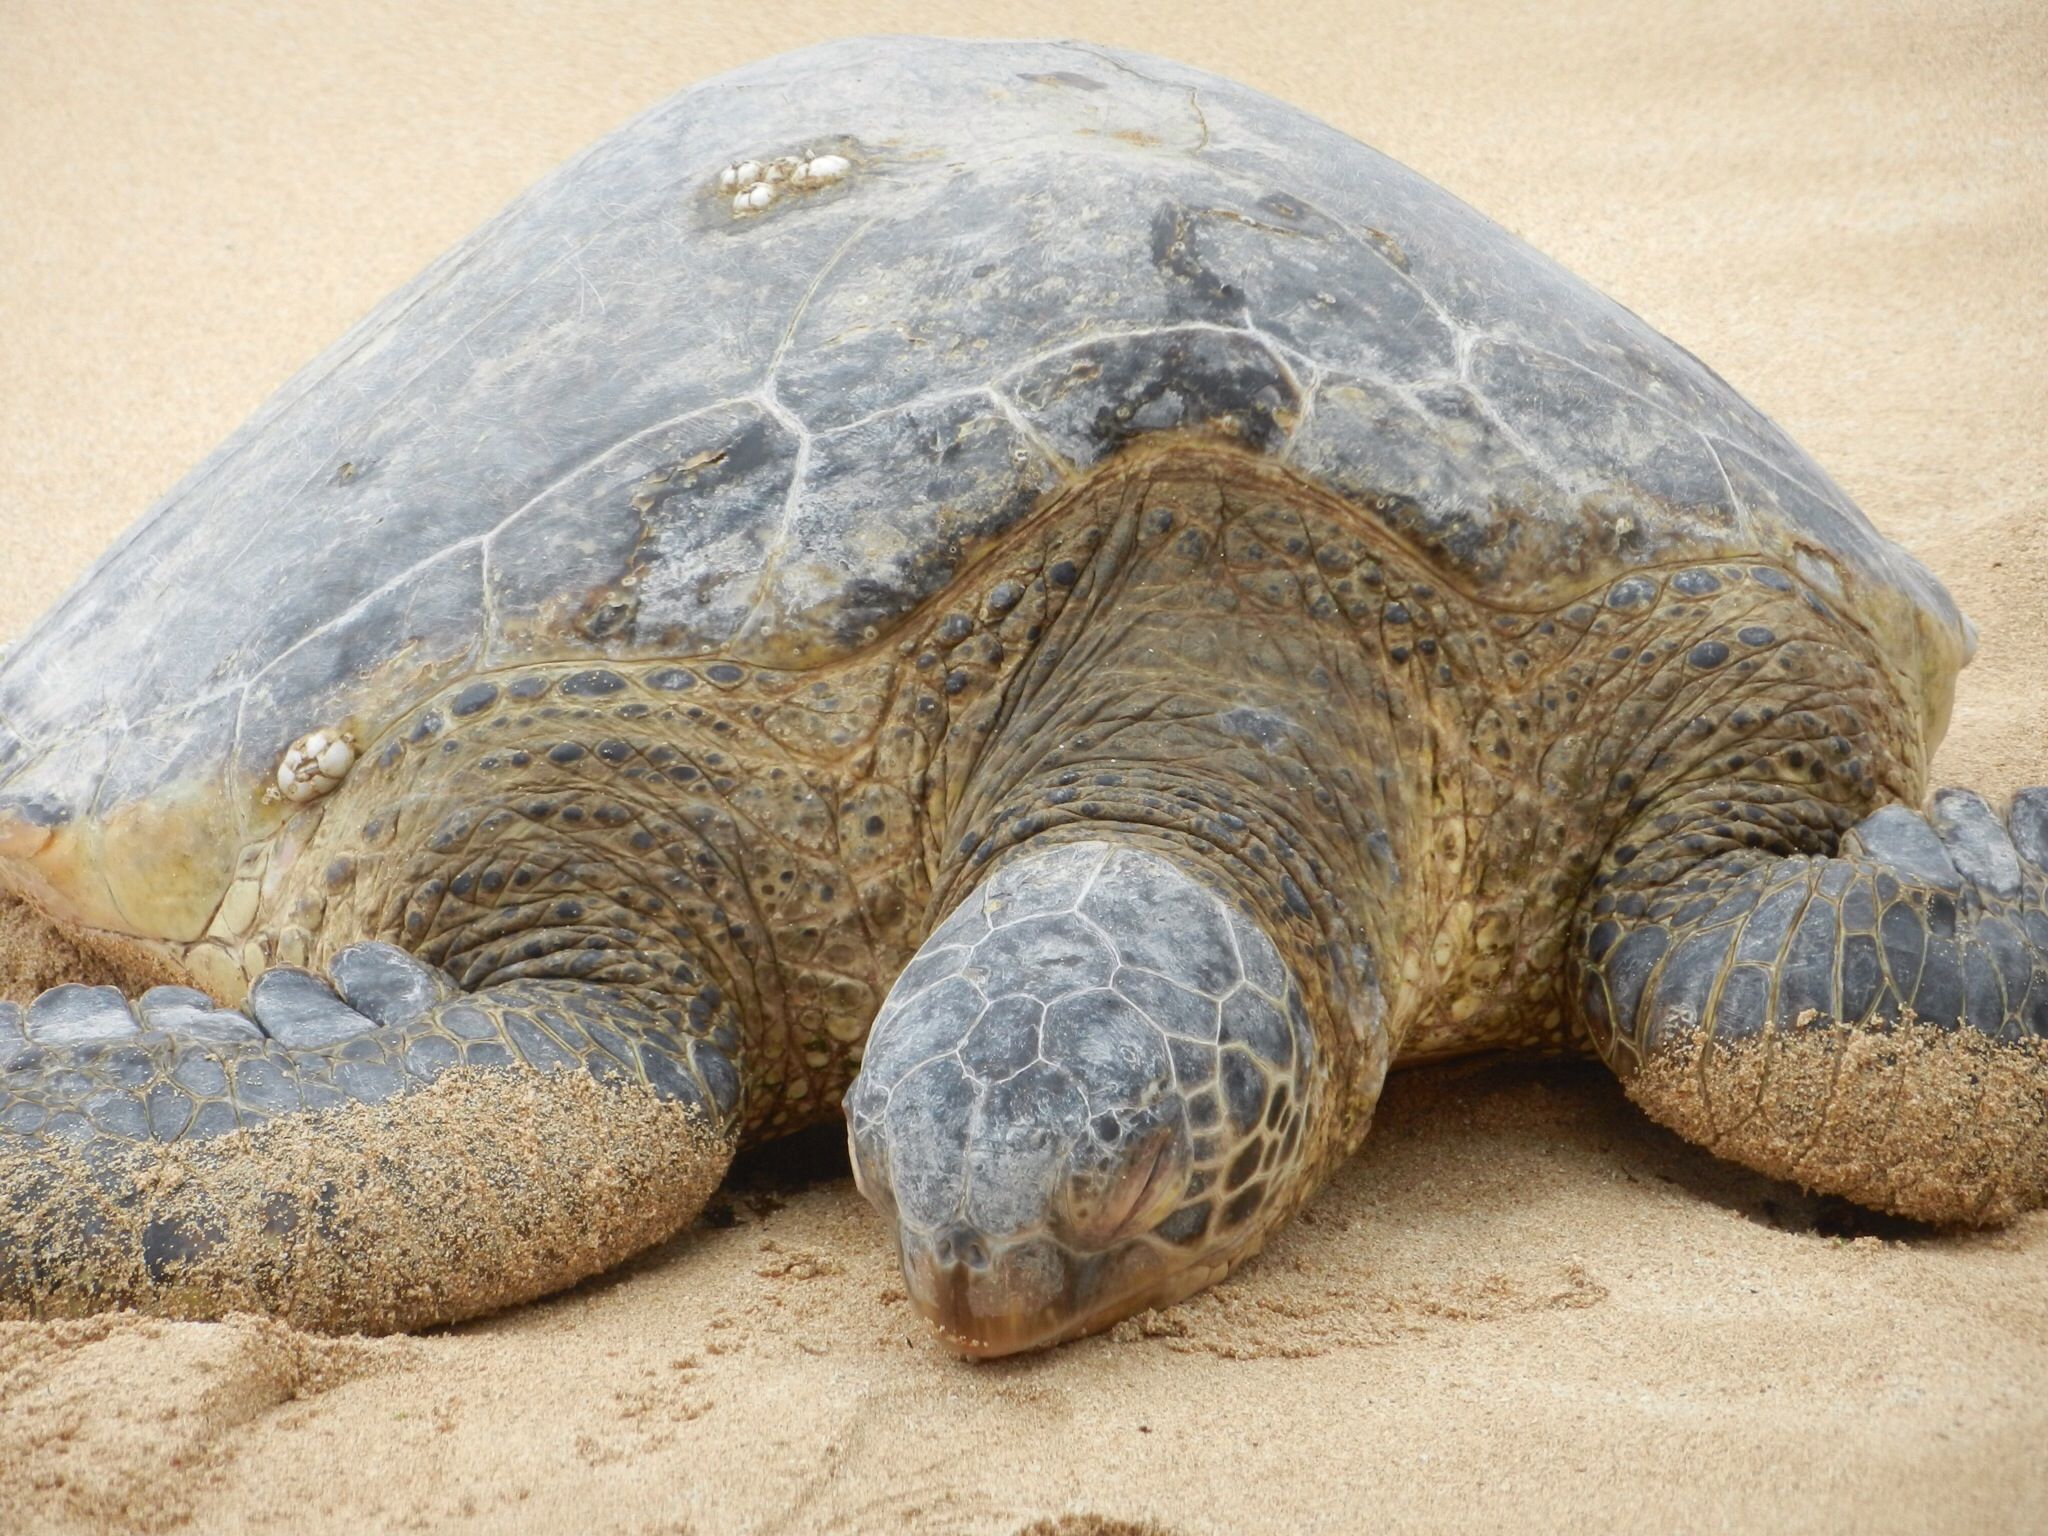 North Shore, Oahu. Estimated 200 lb, 40 year old turtle resting on ...